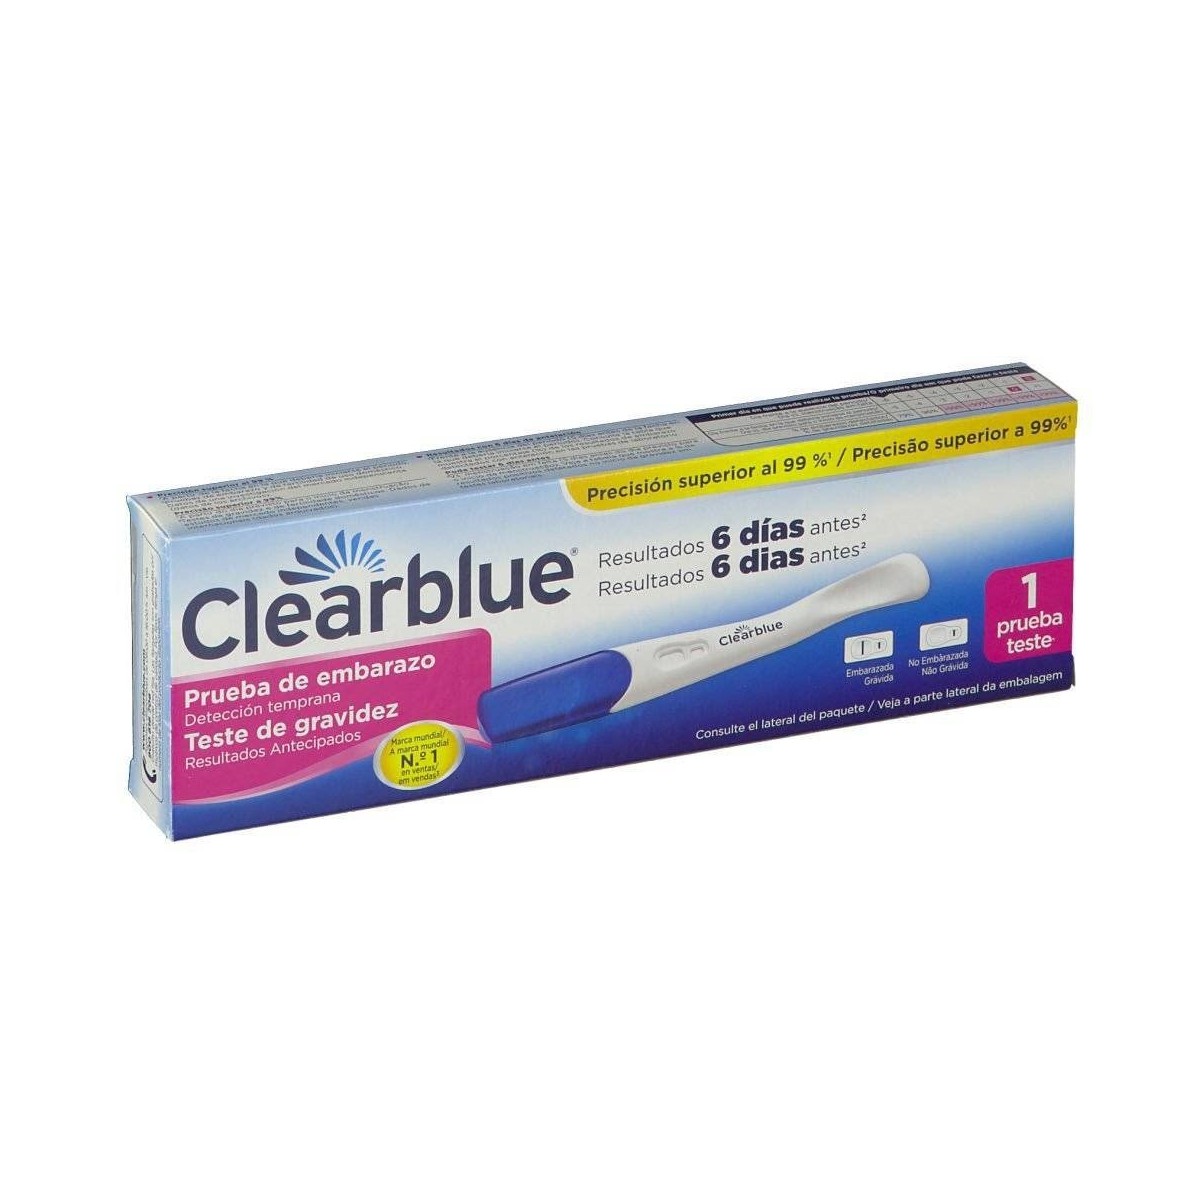 Clearblue Test de embarazo